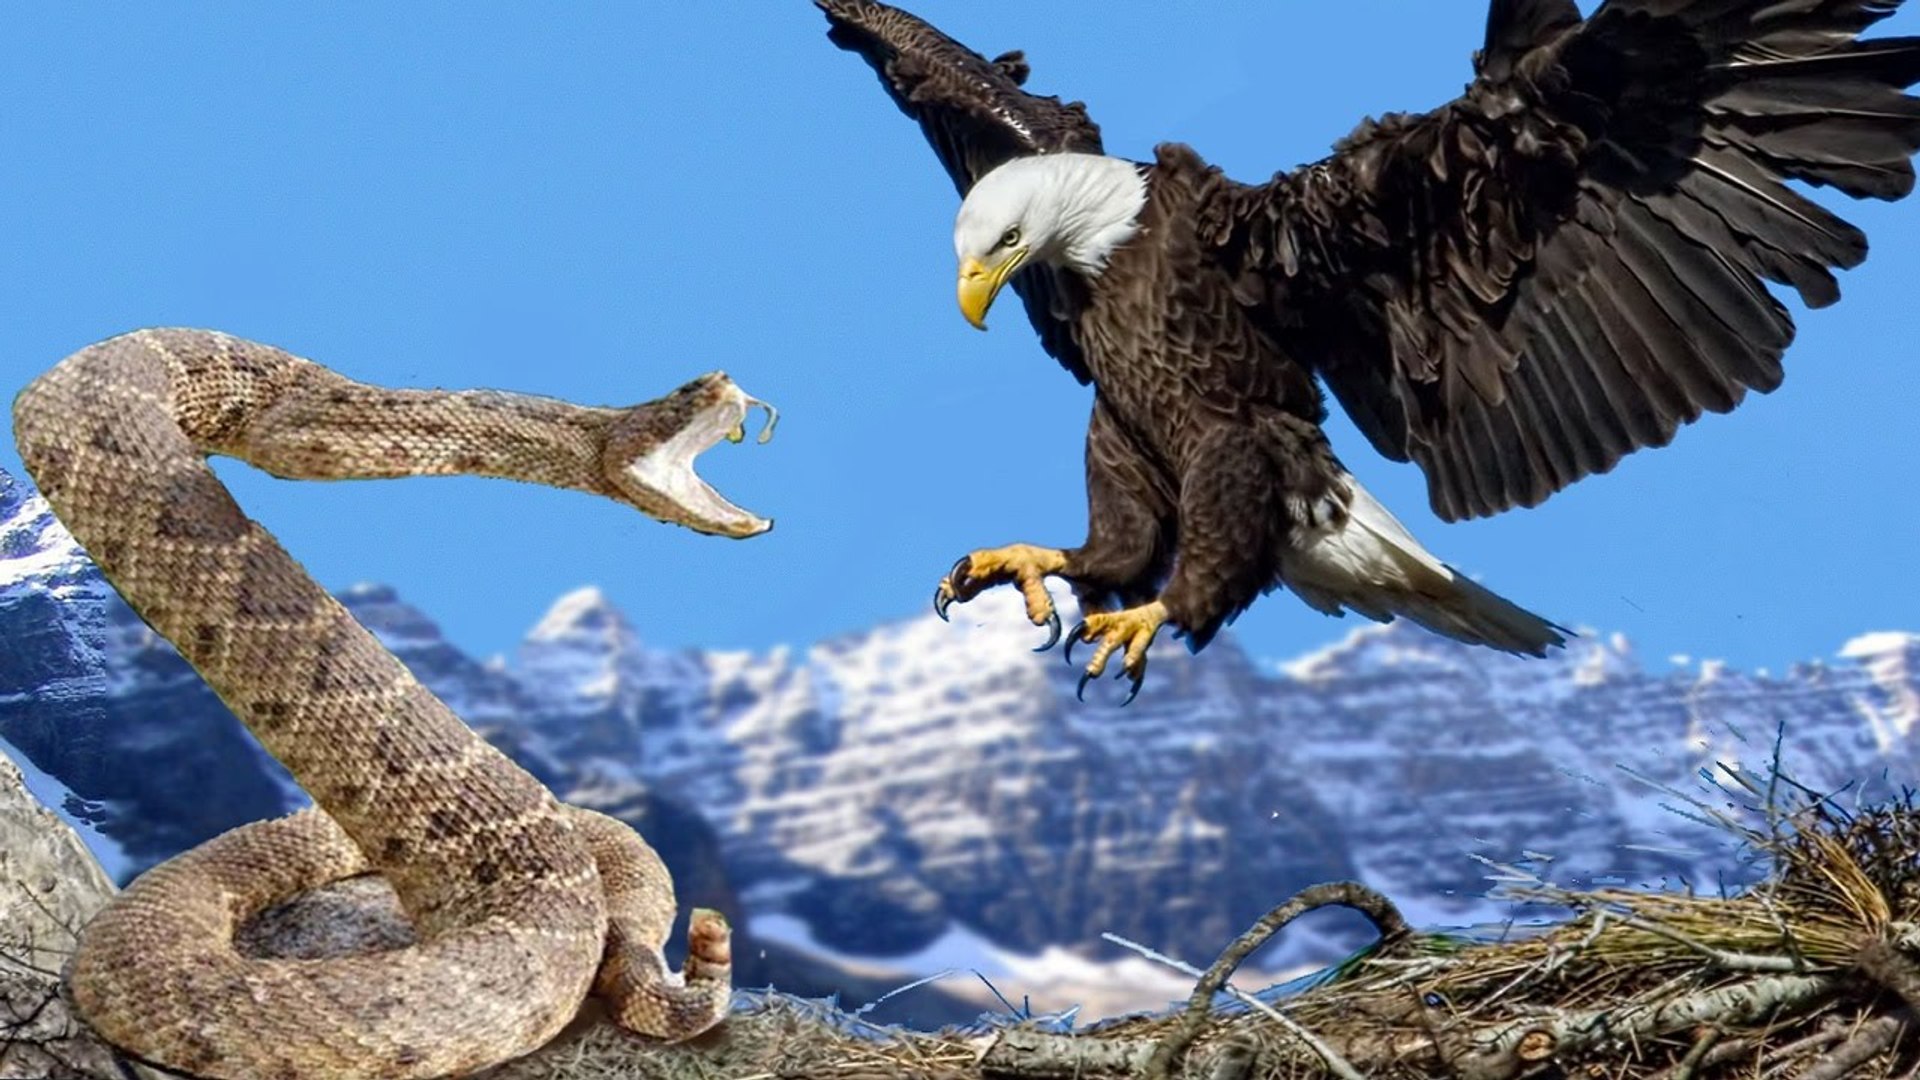 Eagle Attack on Snake Letest Video 2016 - video Dailymotion